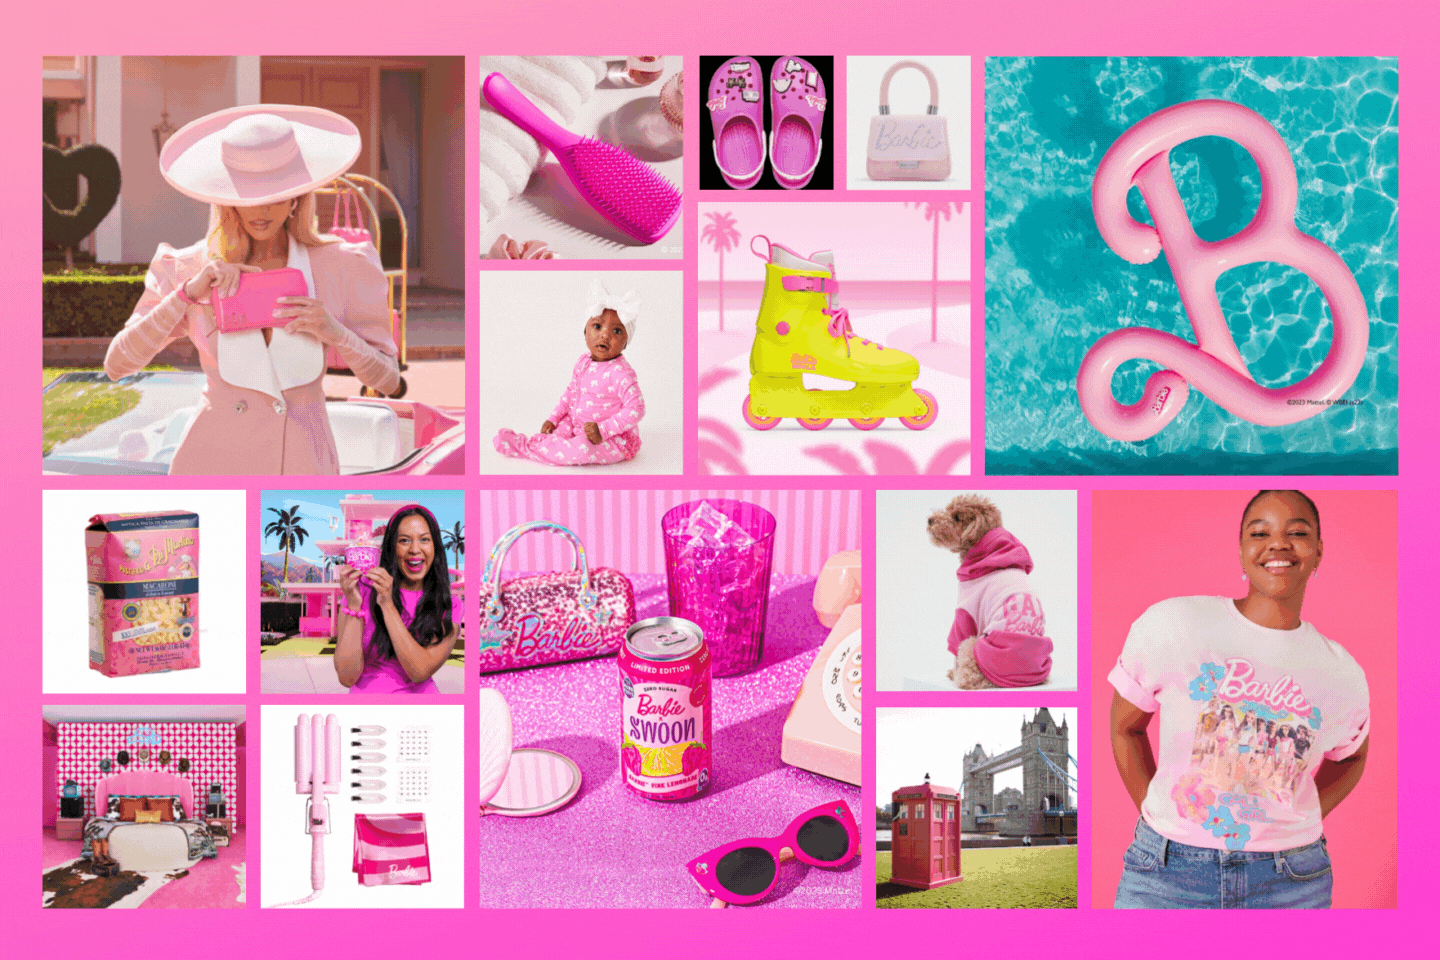 Why Are We All So Obsessed With Barbie?